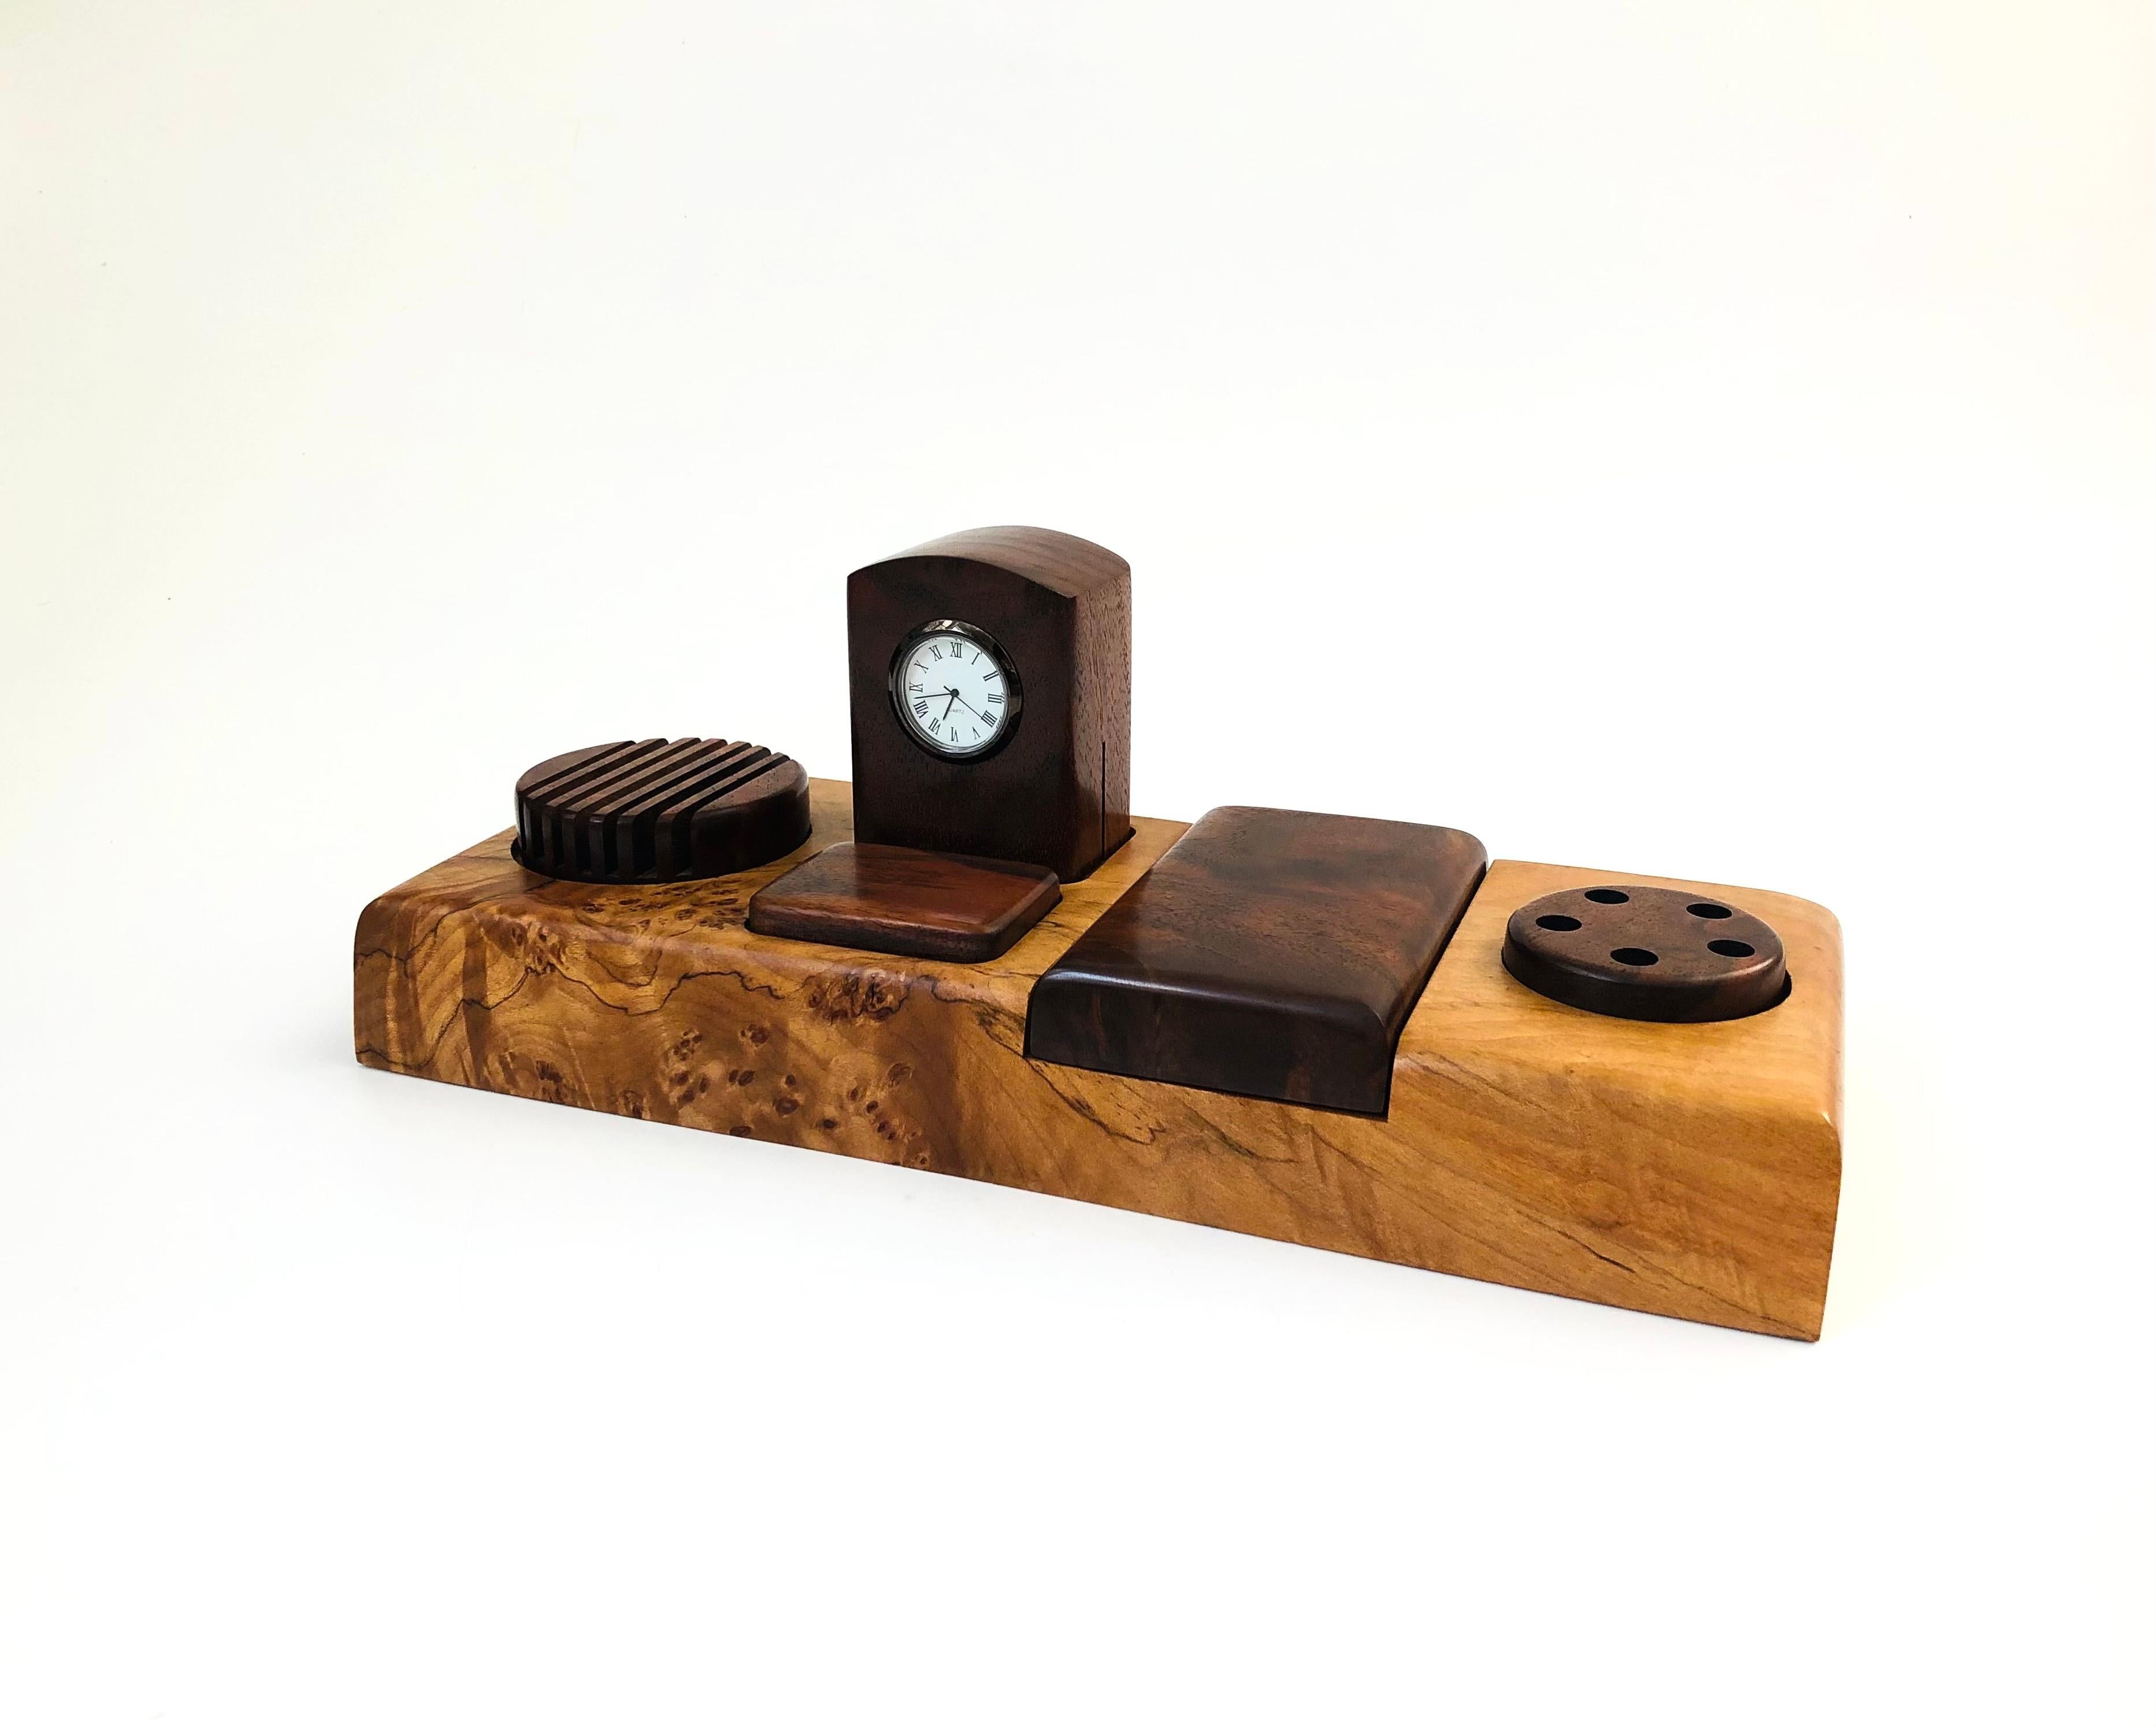 A beautiful vintage carved wood valet by Michael Elkan Studio. Walnut toned wood components nest neatly into a lighter toned burlwood base. Features circular letter and pen holders on each side. In the center is a small storage compartment for